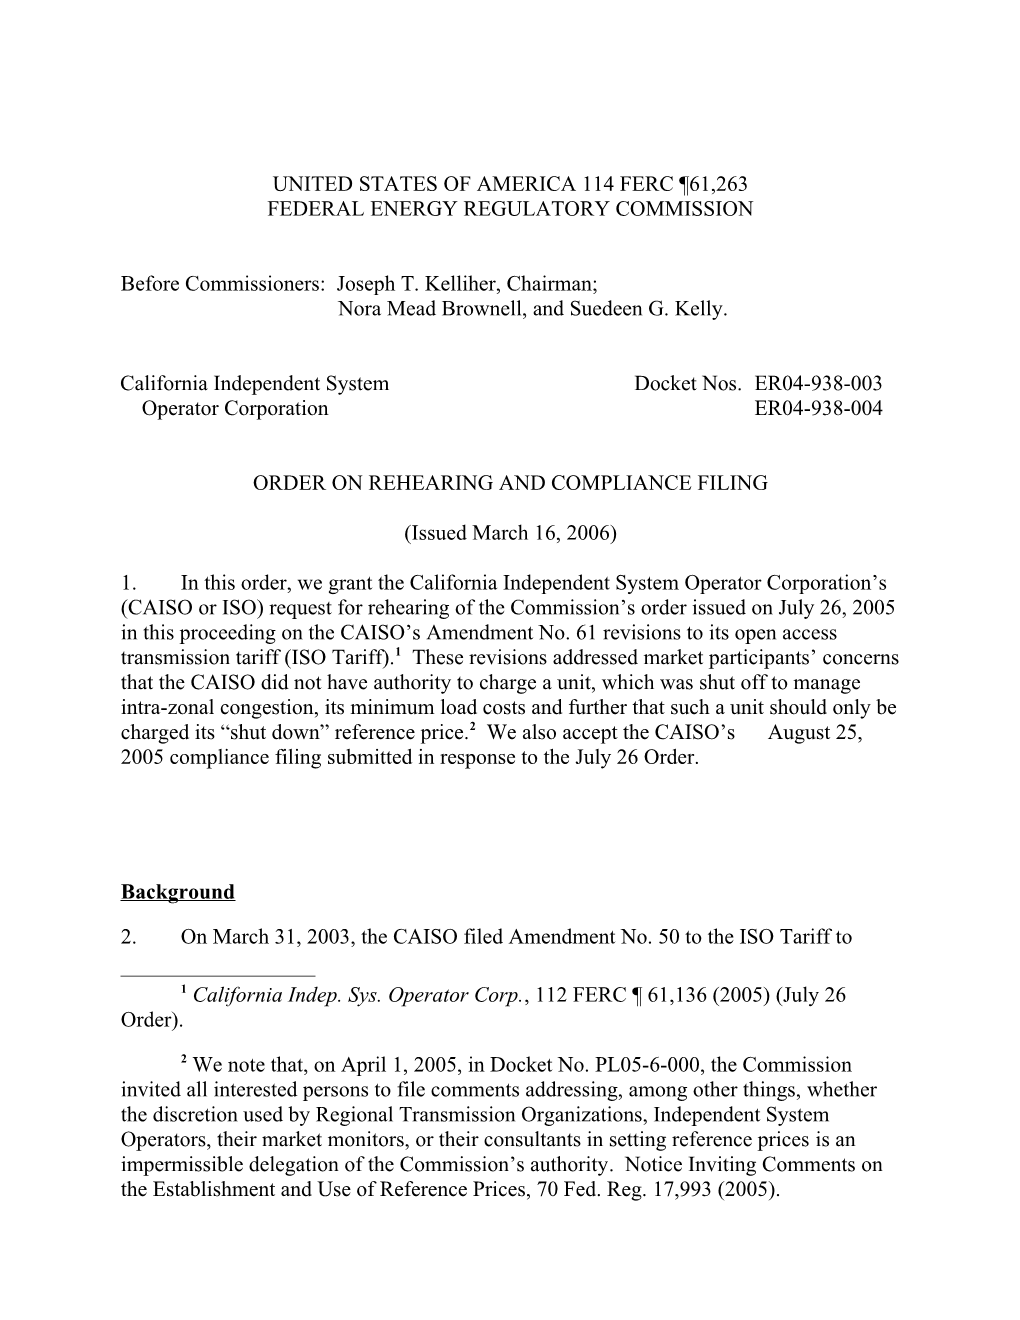 March 16, 2006 FERC Order on Rehearing and Compliance Filing in Docket No. ER04-938-003